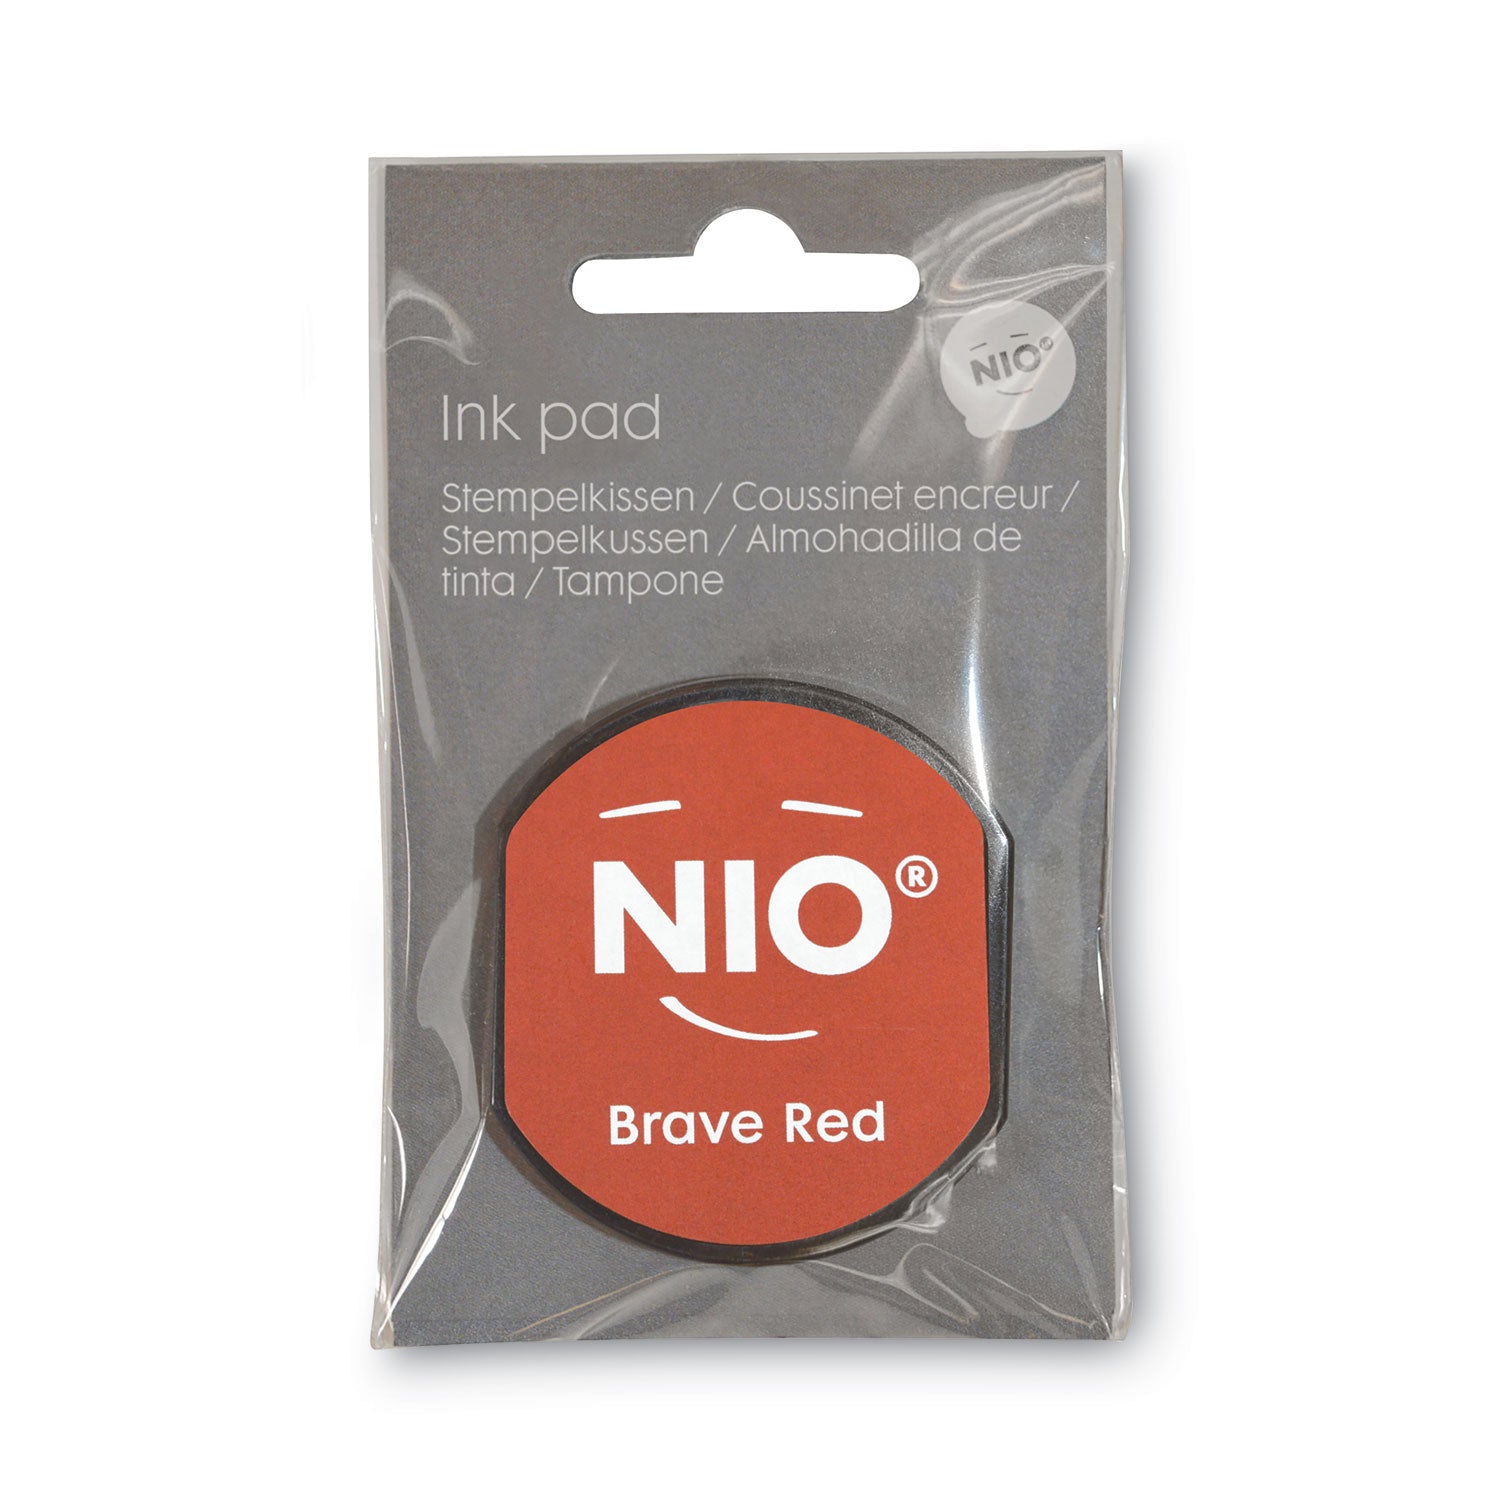 ink-pad-for-nio-stamp-with-voucher-275-x-275-brave-red_cos071513 - 2